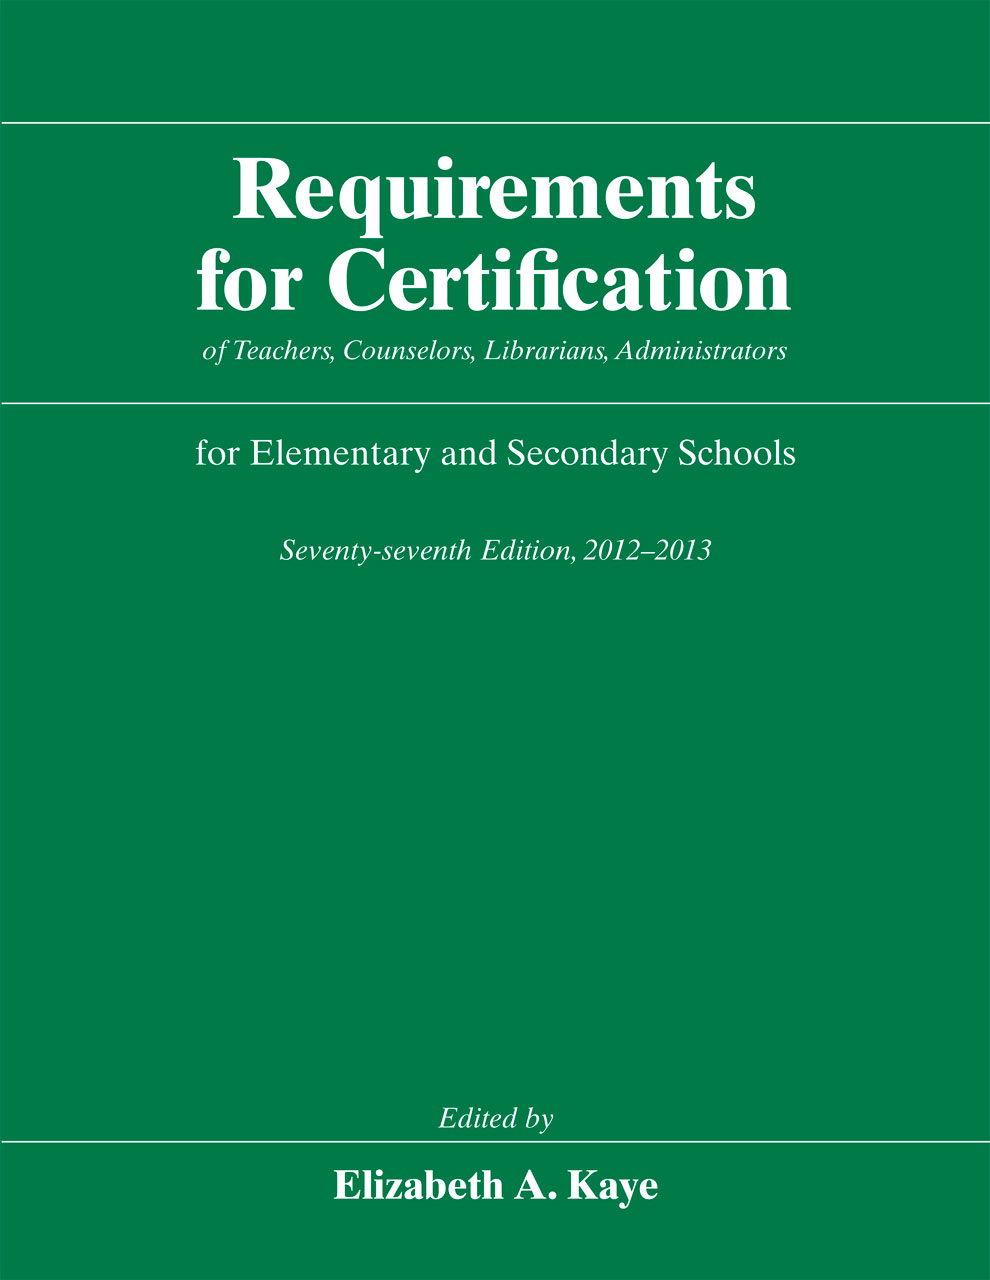 Requirements for Certification of Teachers, Counselors, Librarians, and Administ (Requirements for Certification for Elementary Schools, Secondary Schools, Junior) Elizabeth A. Kaye